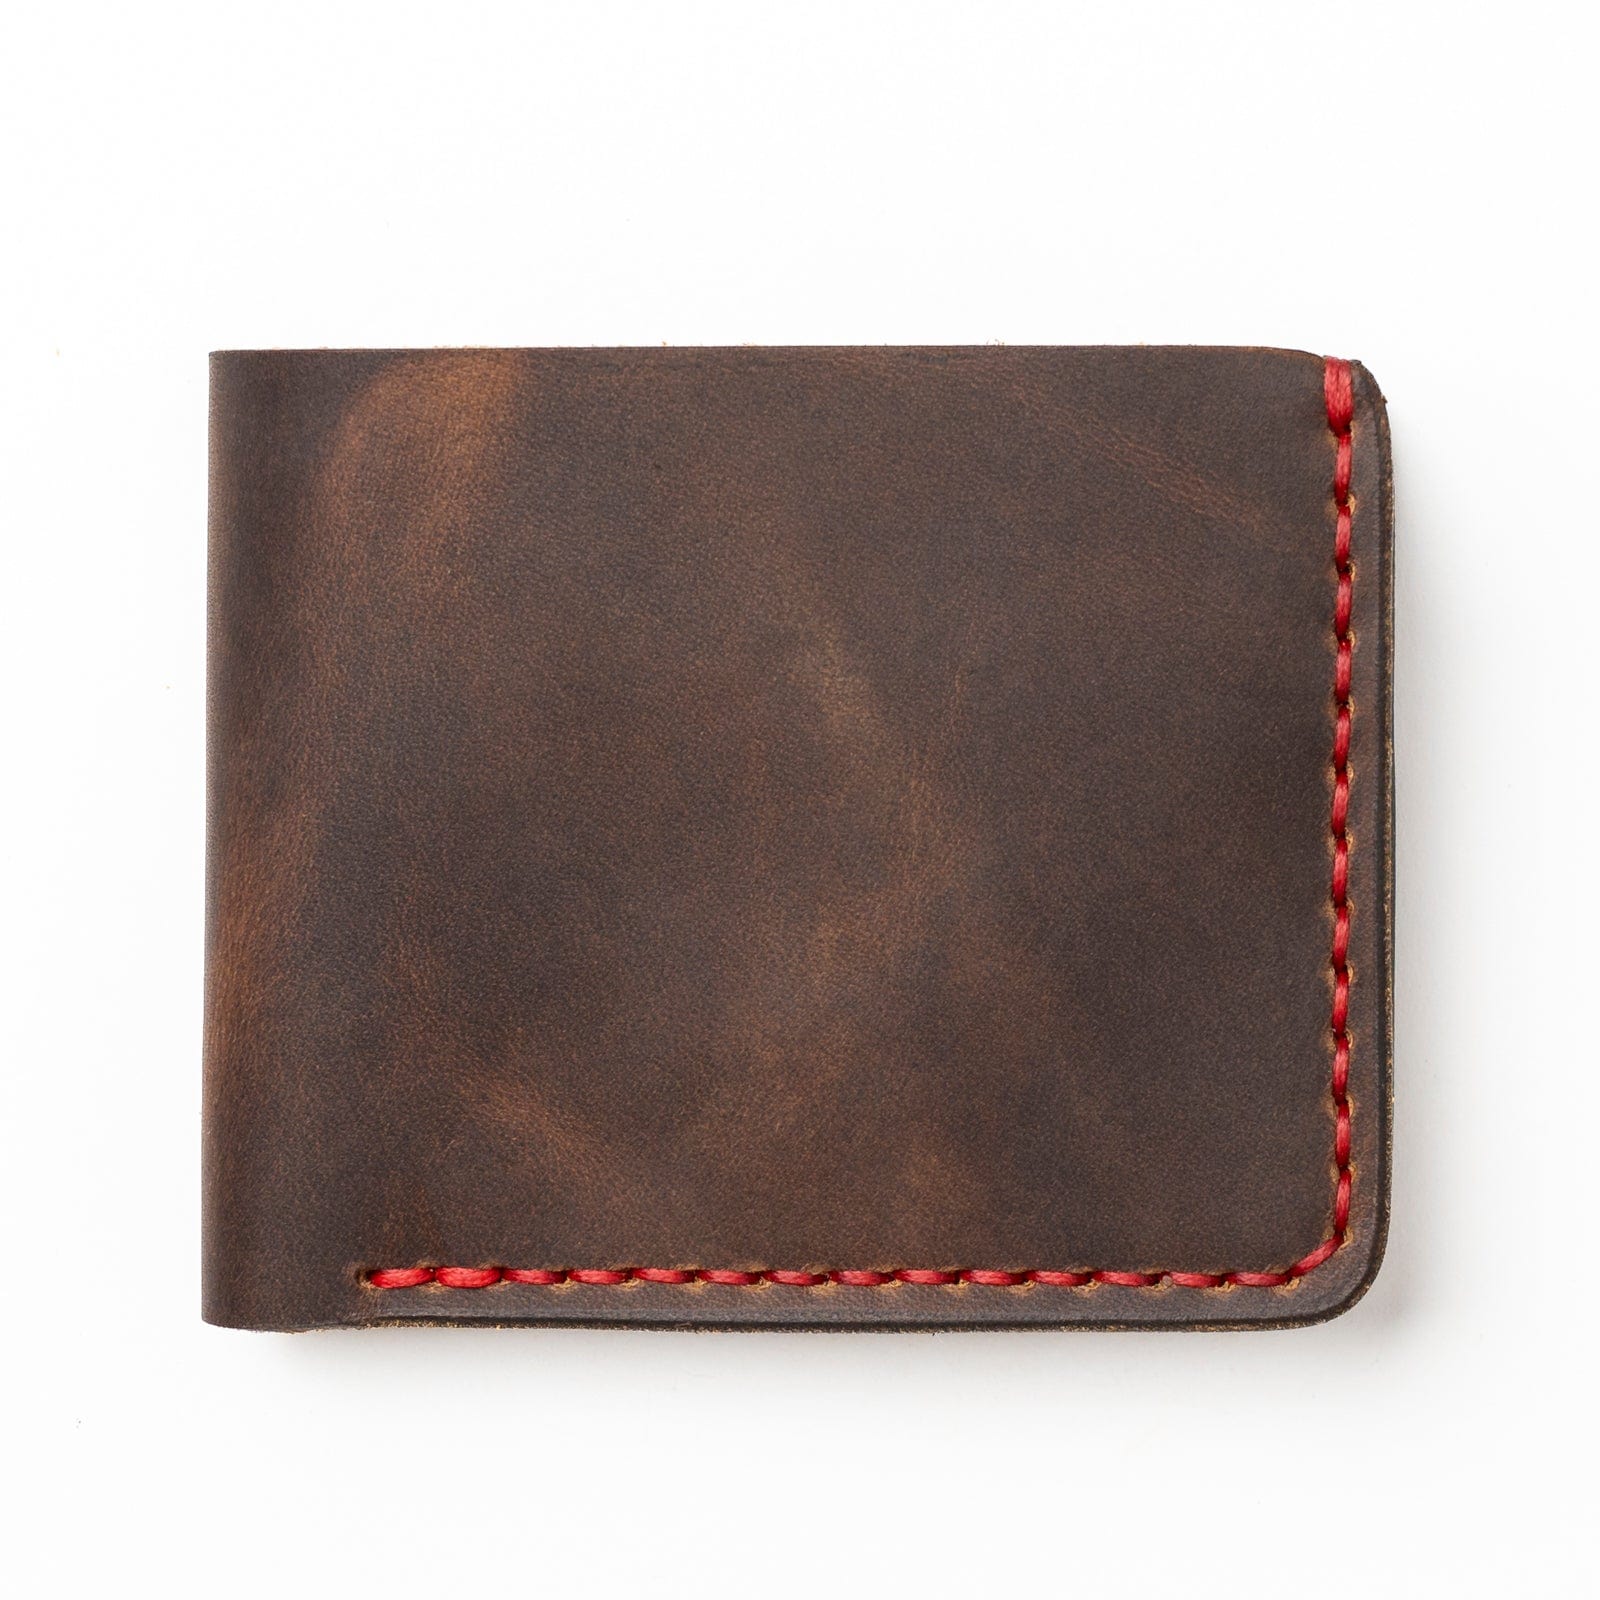 Black Leather Billfold: Where Timeless Design Meets Functionality